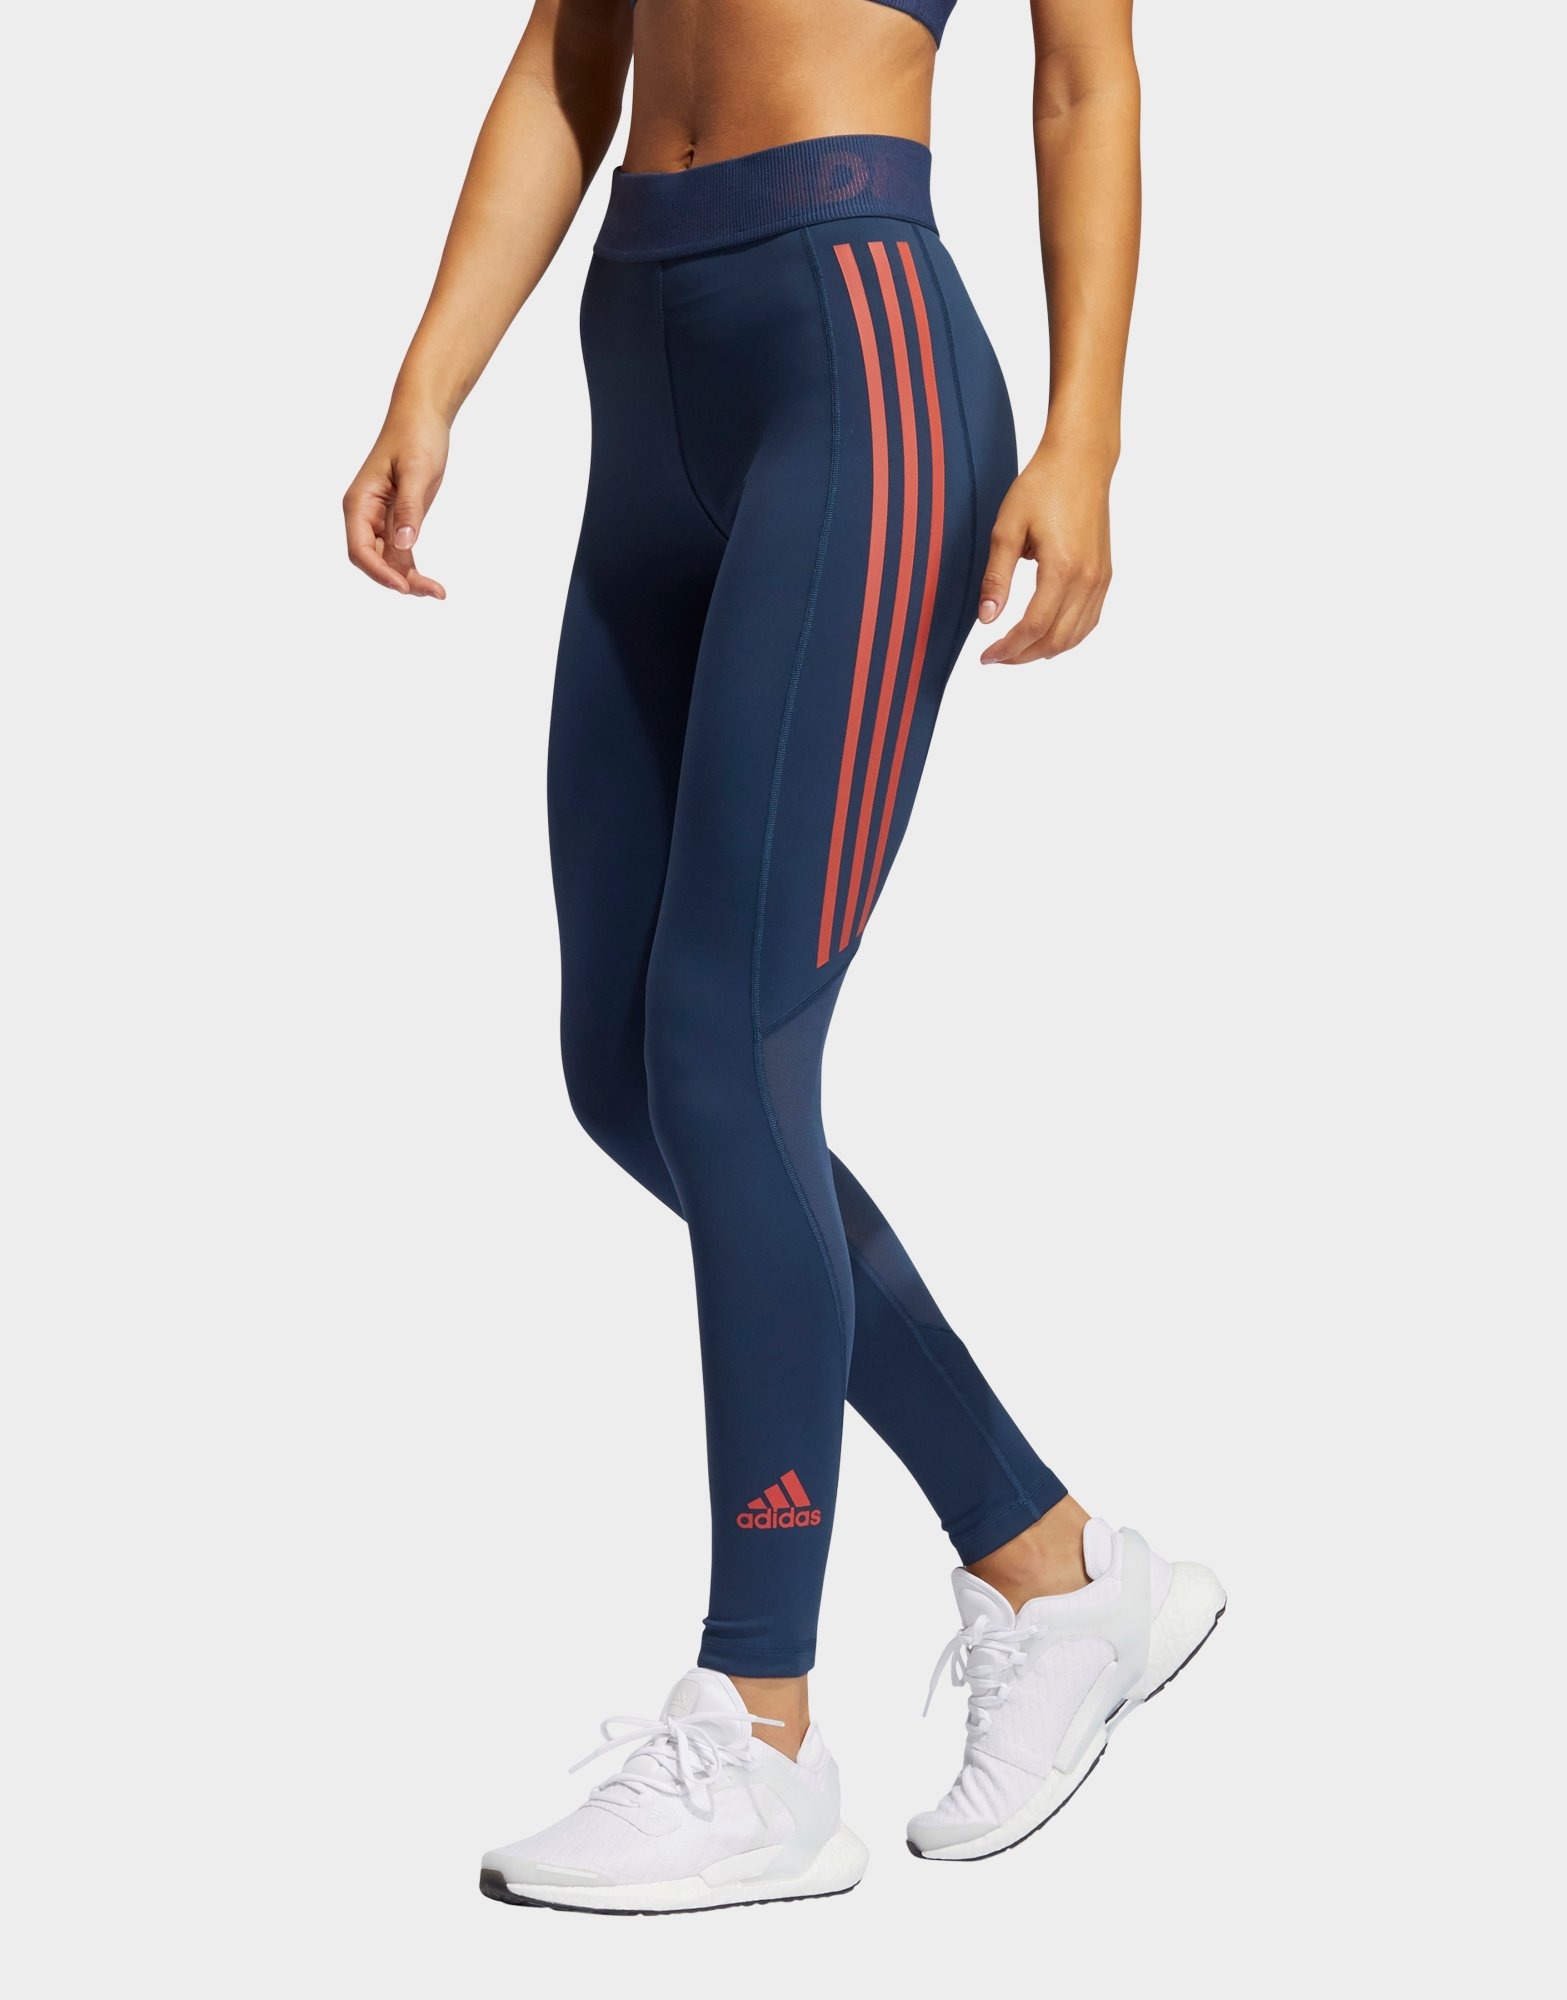 adidas Women's Believe This 2.0 Long Tight